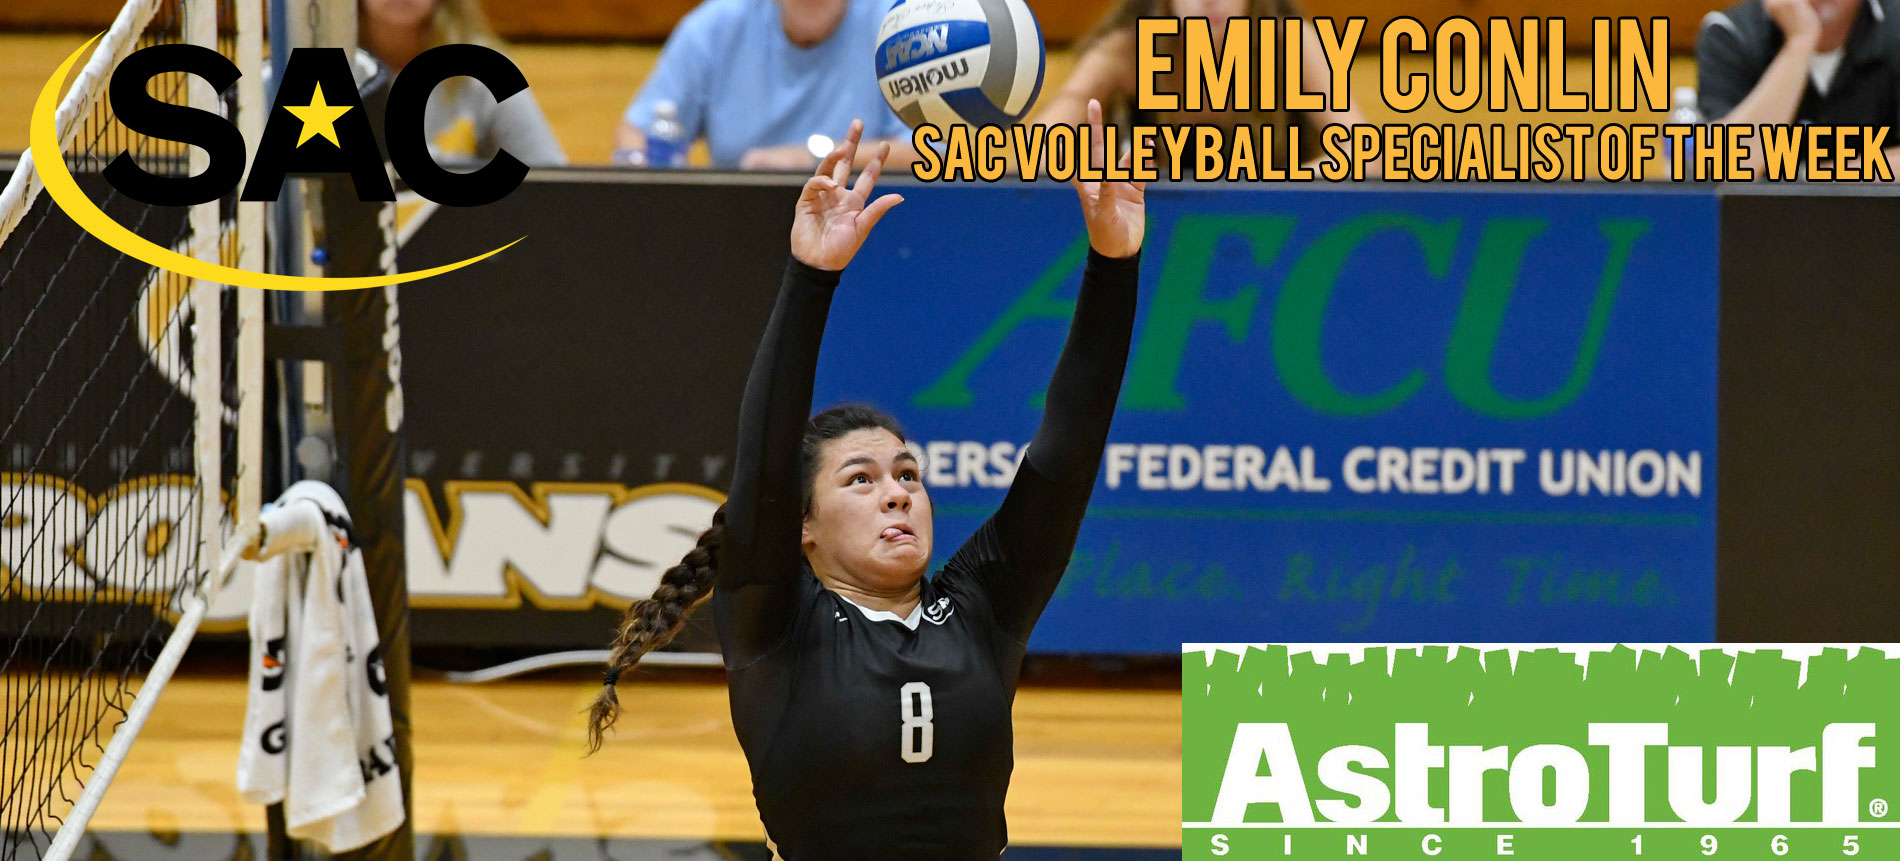 Conlin Named AstroTurf SAC Volleyball Specialist of the Week